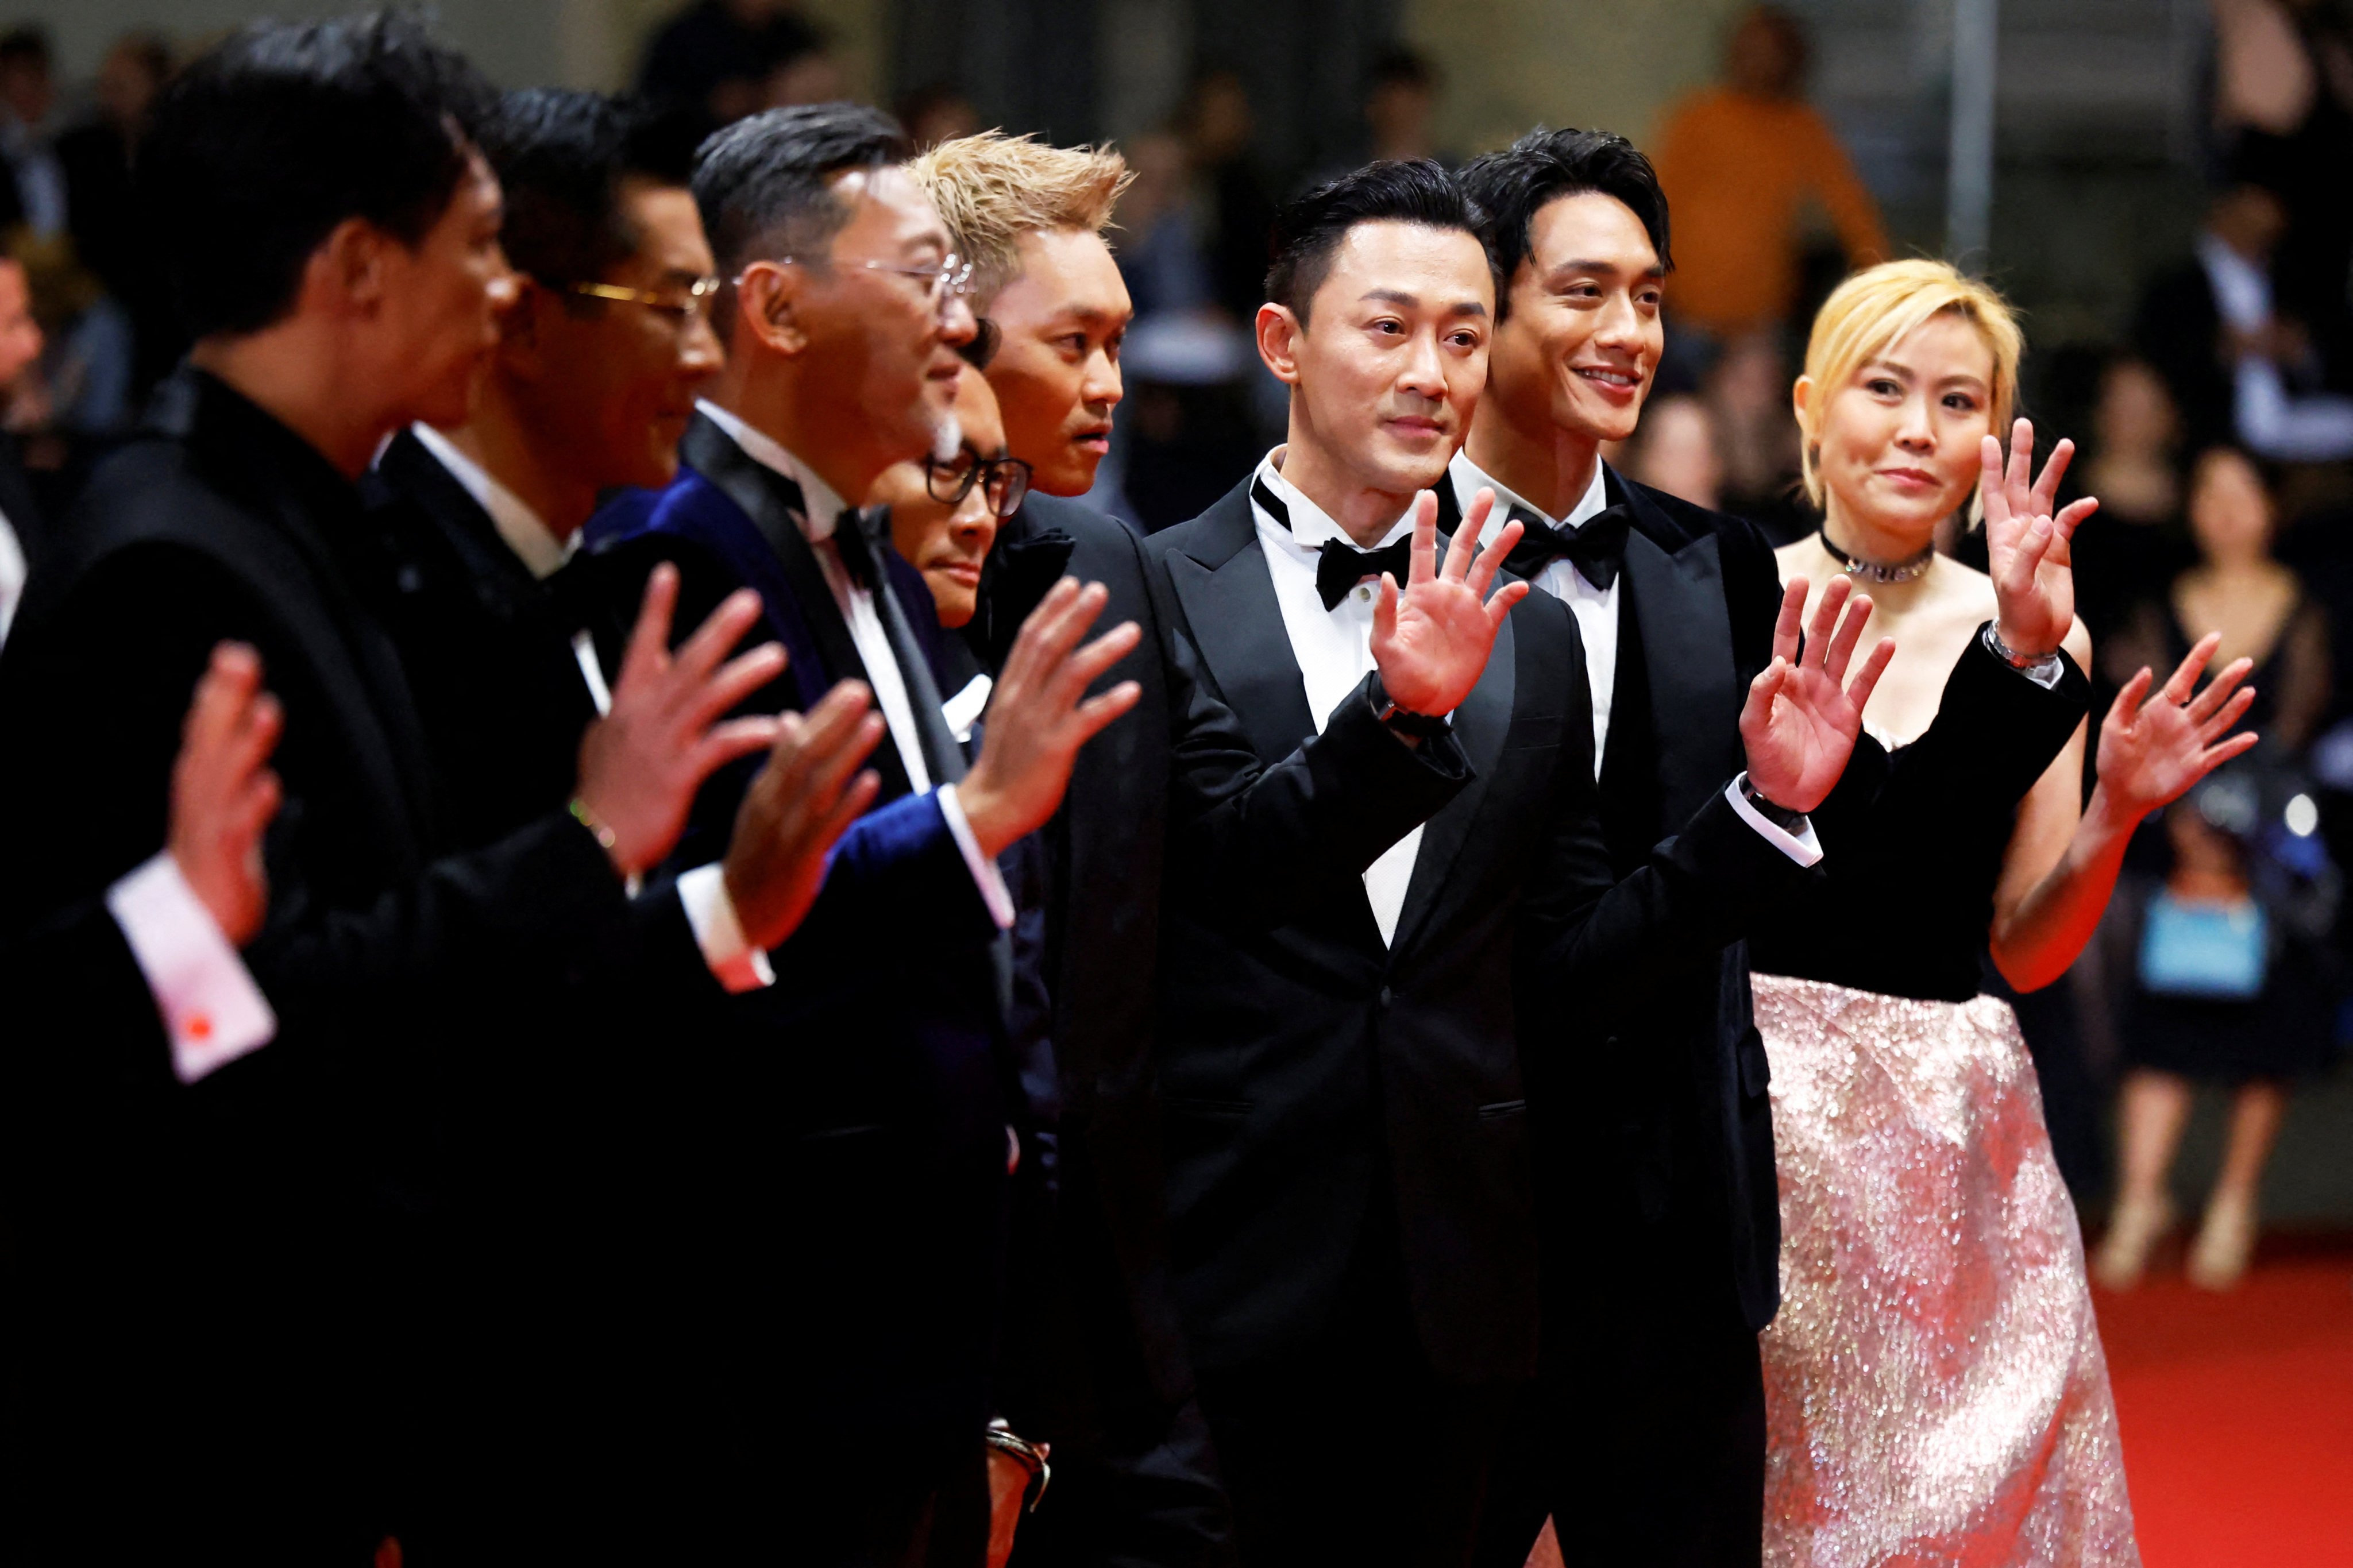 Director Soi Cheang and cast members of the film “Twilight of the Warriors: Walled In” pose on the red carpet as they arrive for the screening of the film at  Cannes Film Festival in Cannes, France, on May 16. Photo: Reuters 